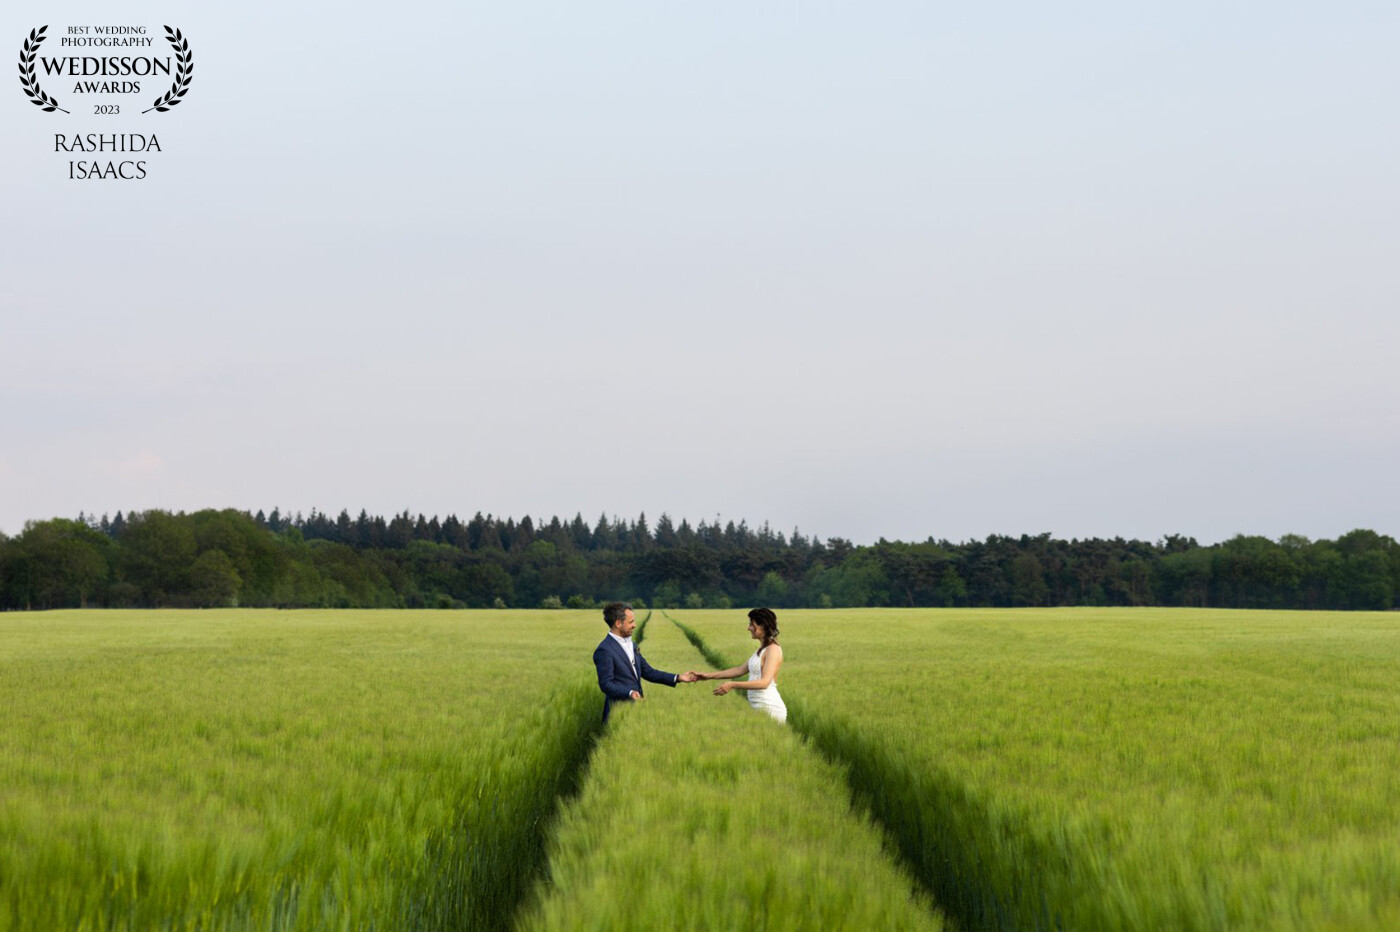 Once I saw the green field and those spaces in between I couldn't stop imagining the bride and groom standing there.